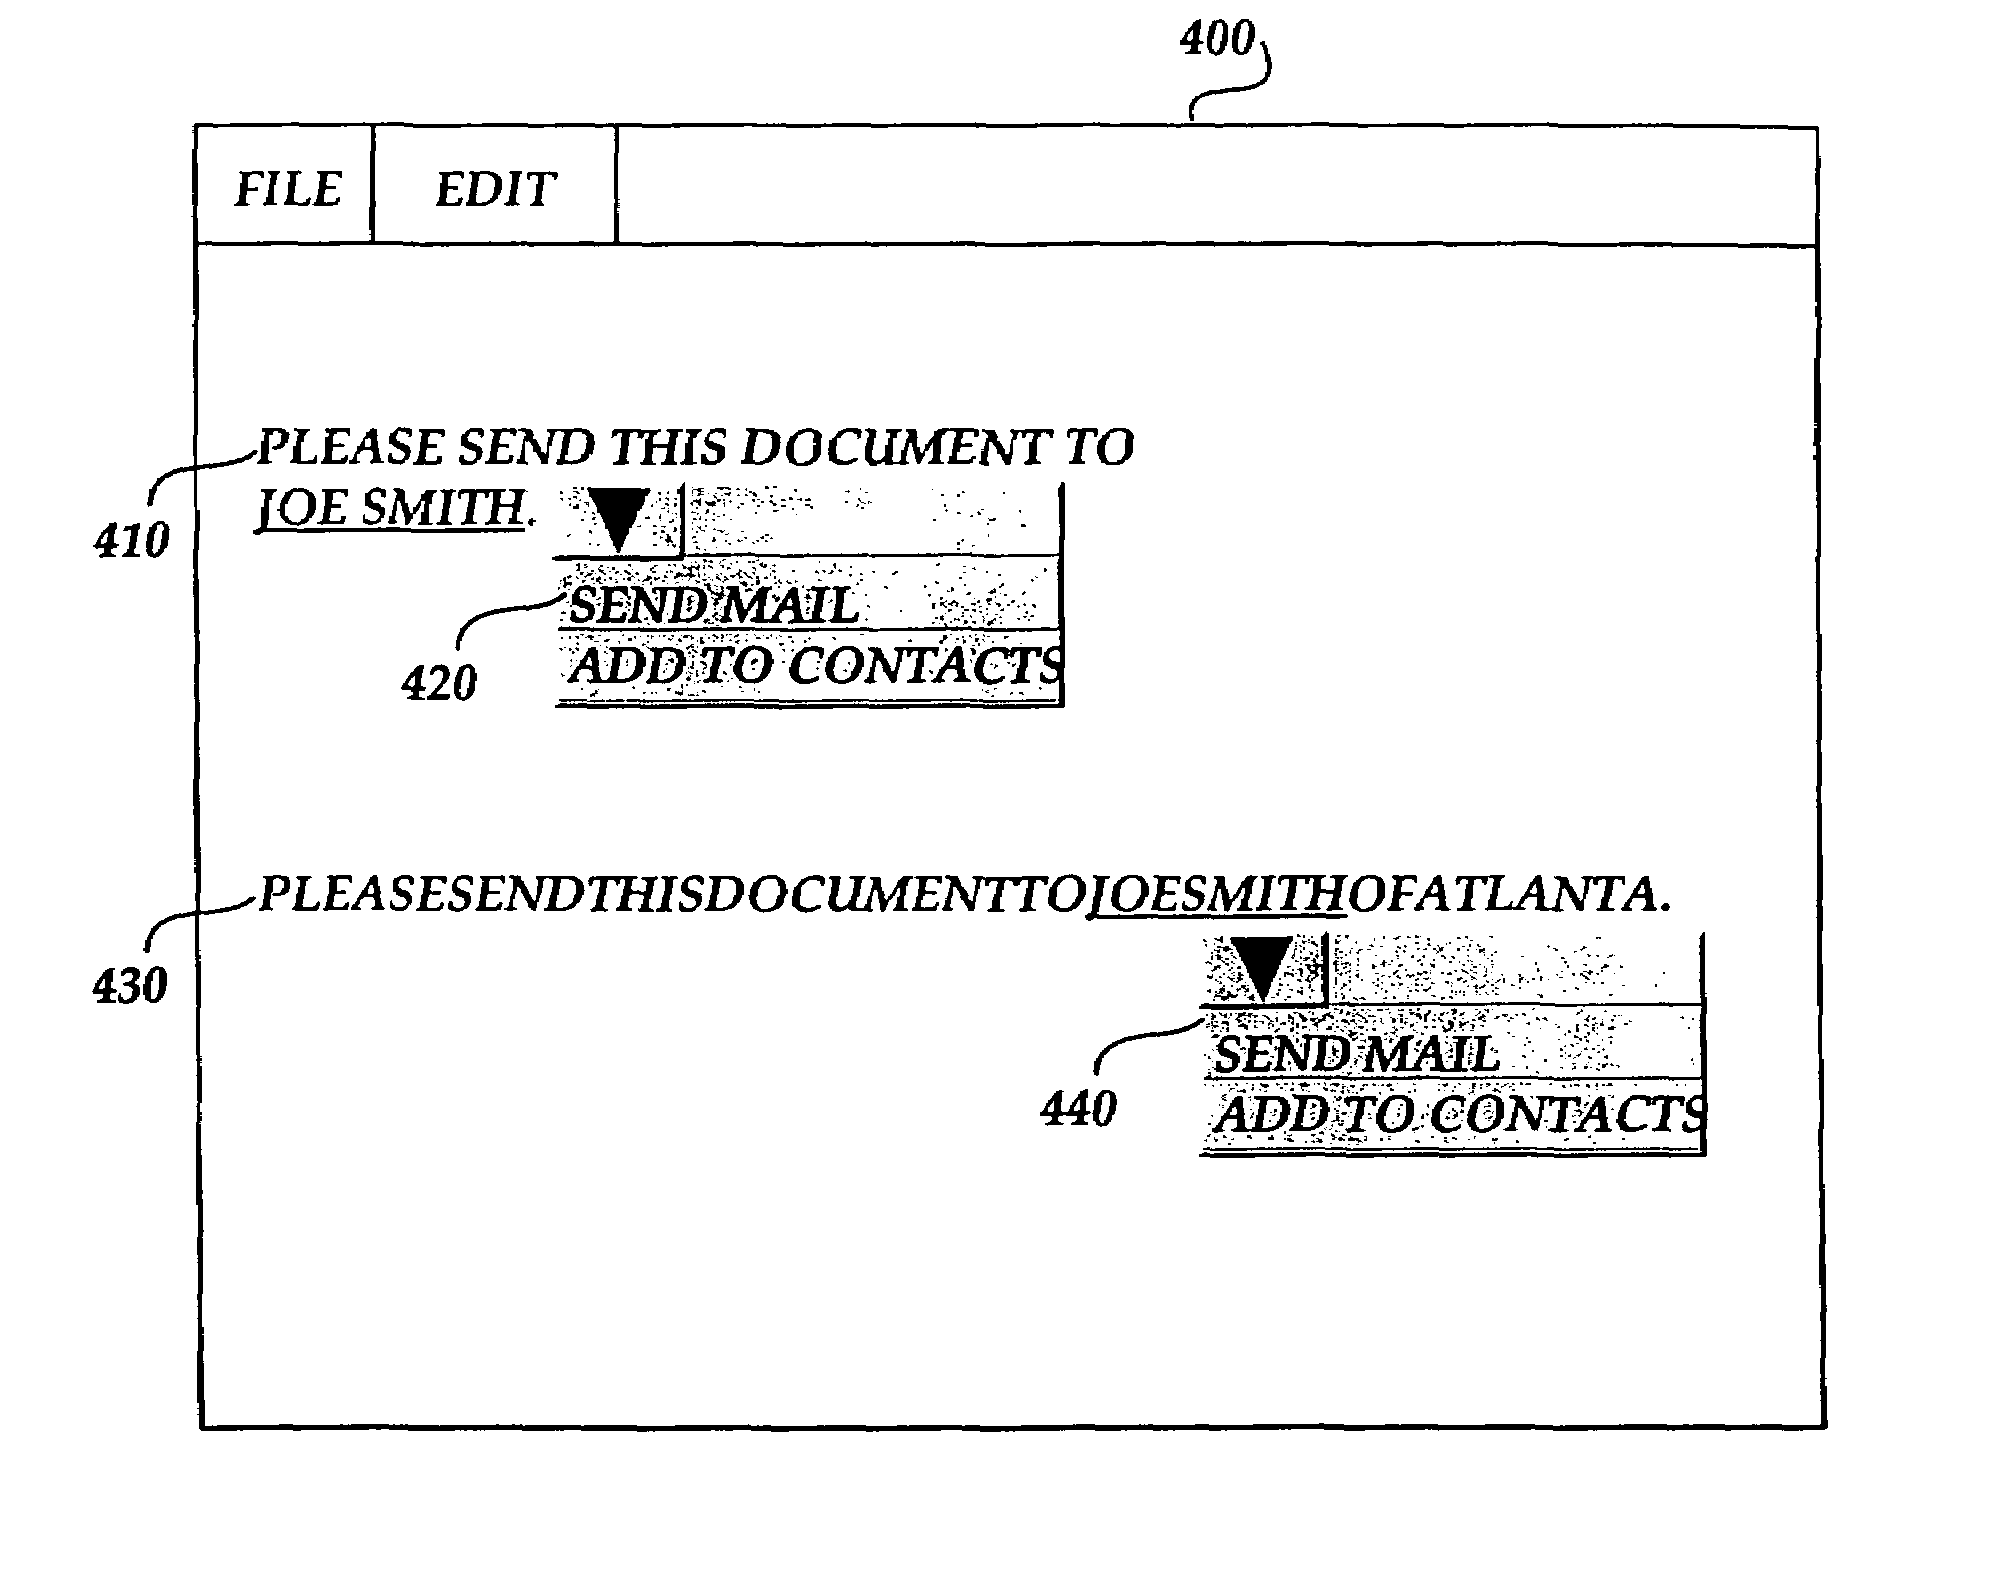 Methods and system for recognizing names in a computer-generated document and for providing helpful actions associated with recognized names